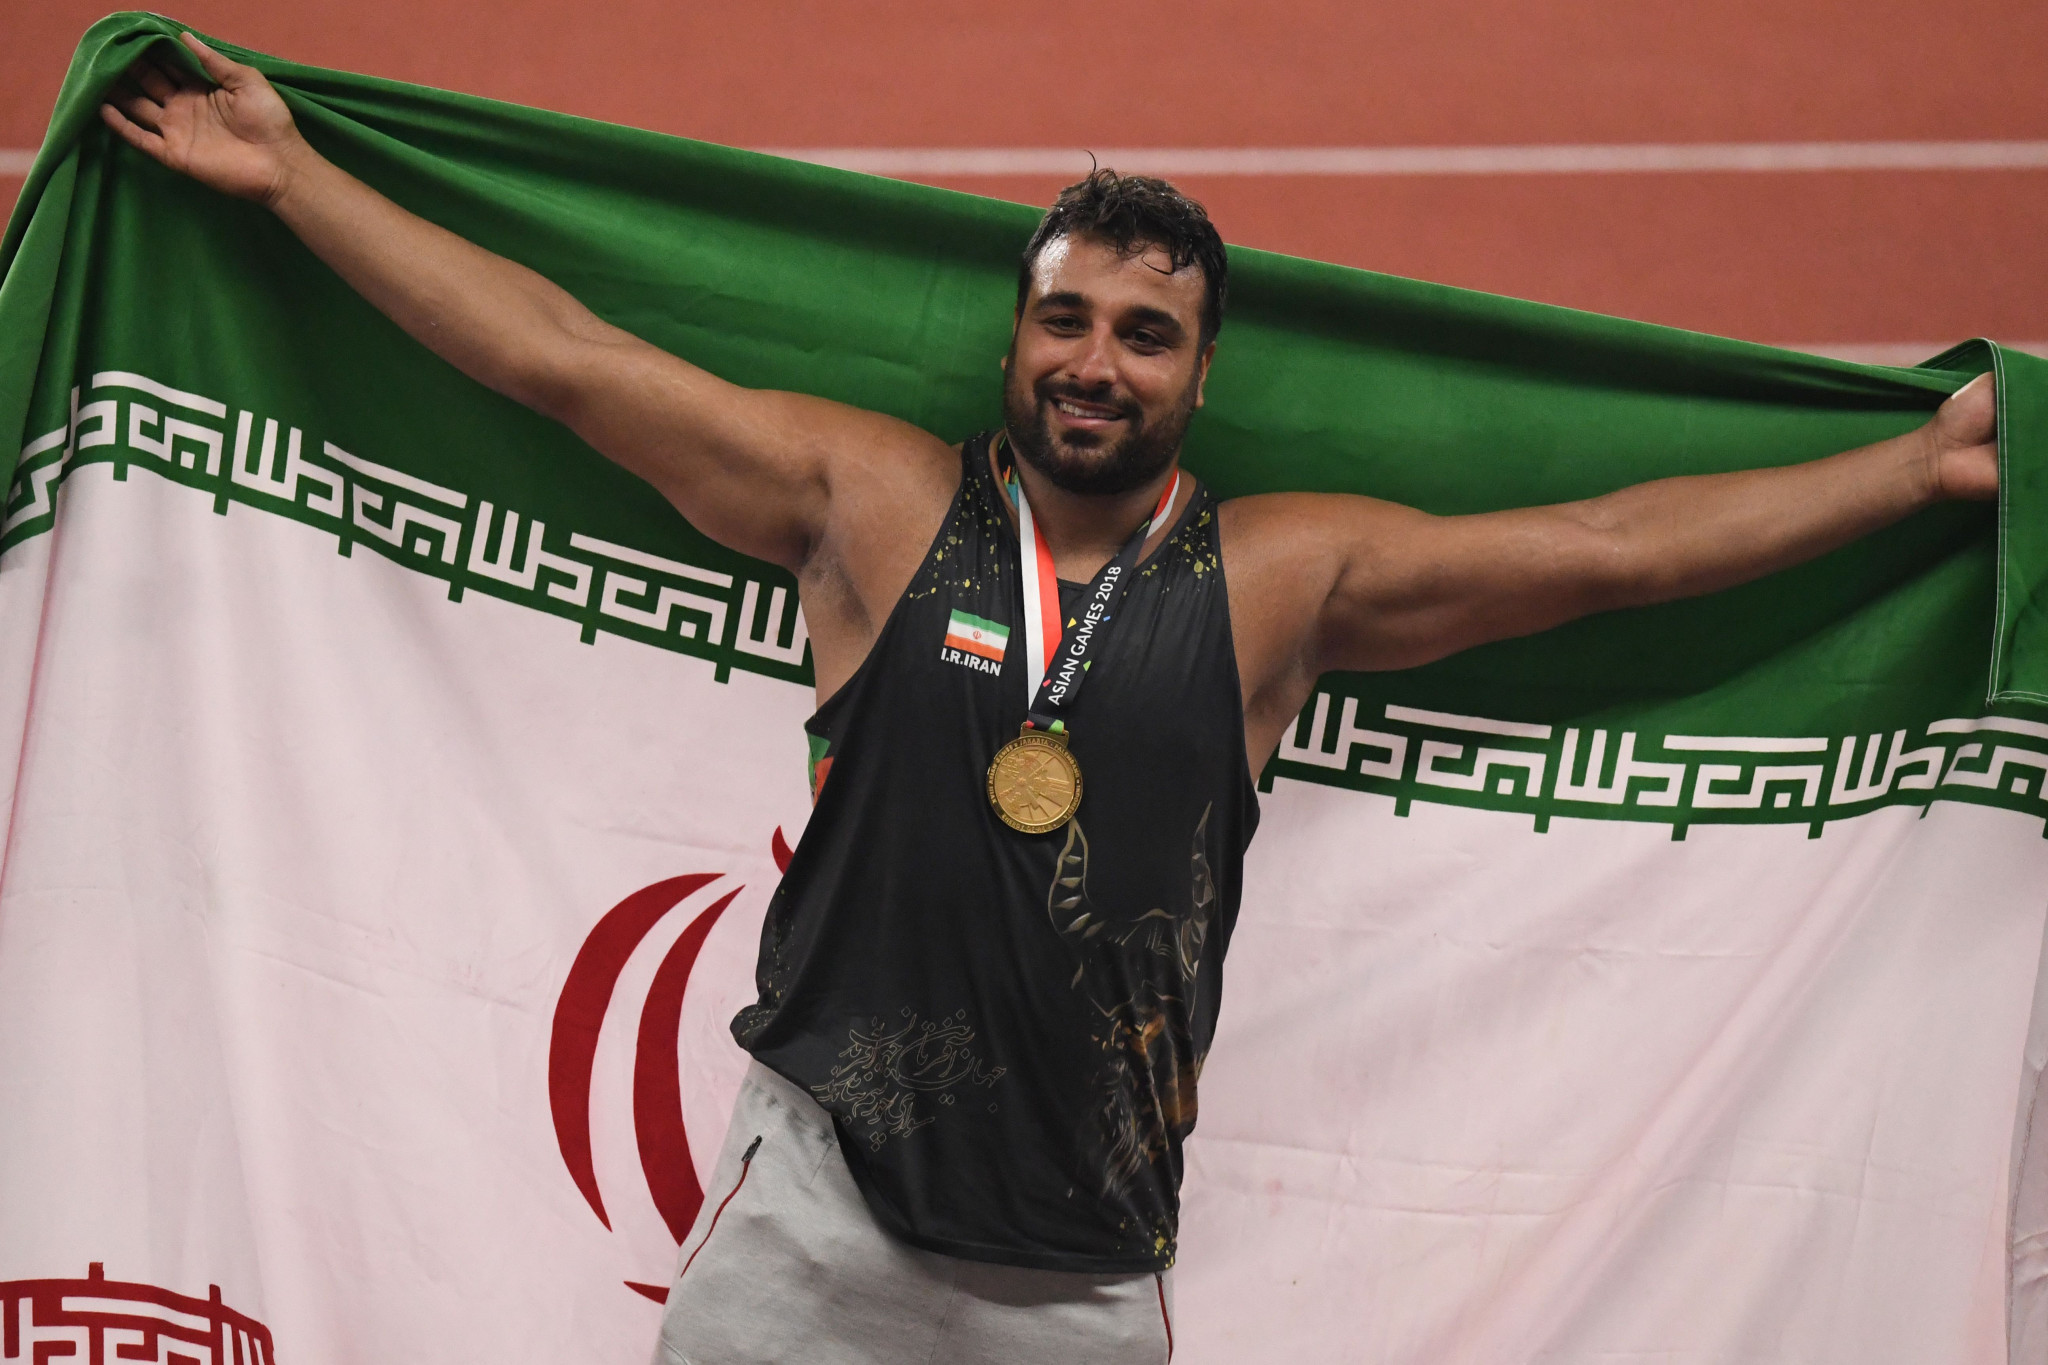 Discus thrower Ehsan Haddadi has also donated memorabilia ©Getty Images 